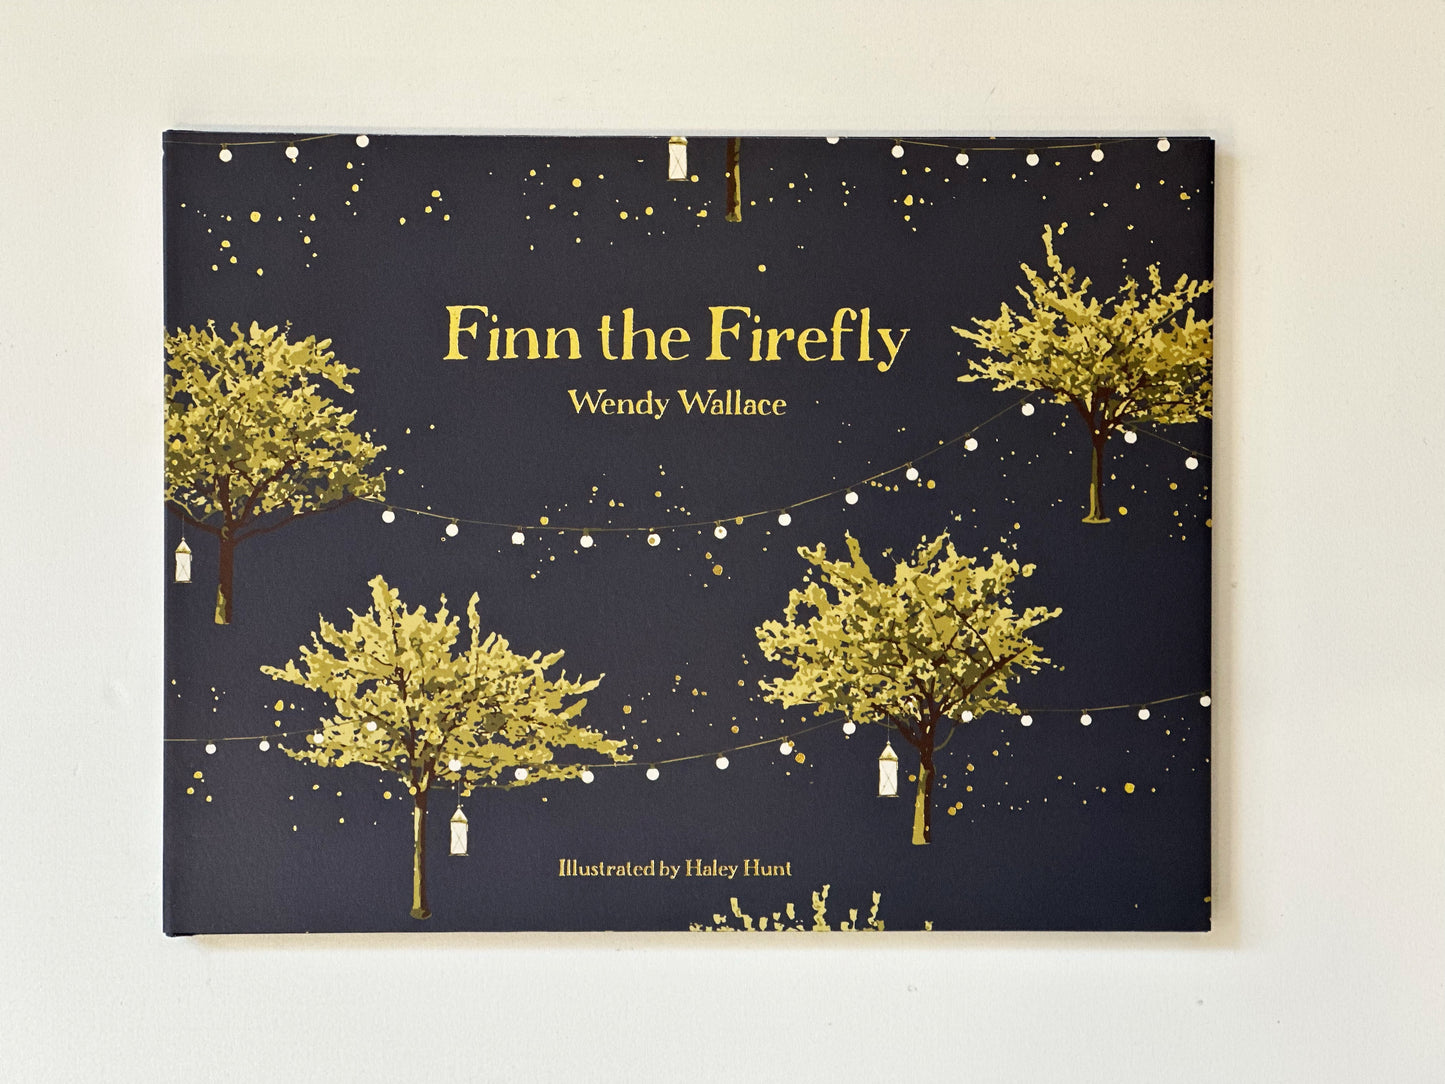 Finn the Firefly by Wendy Wallace